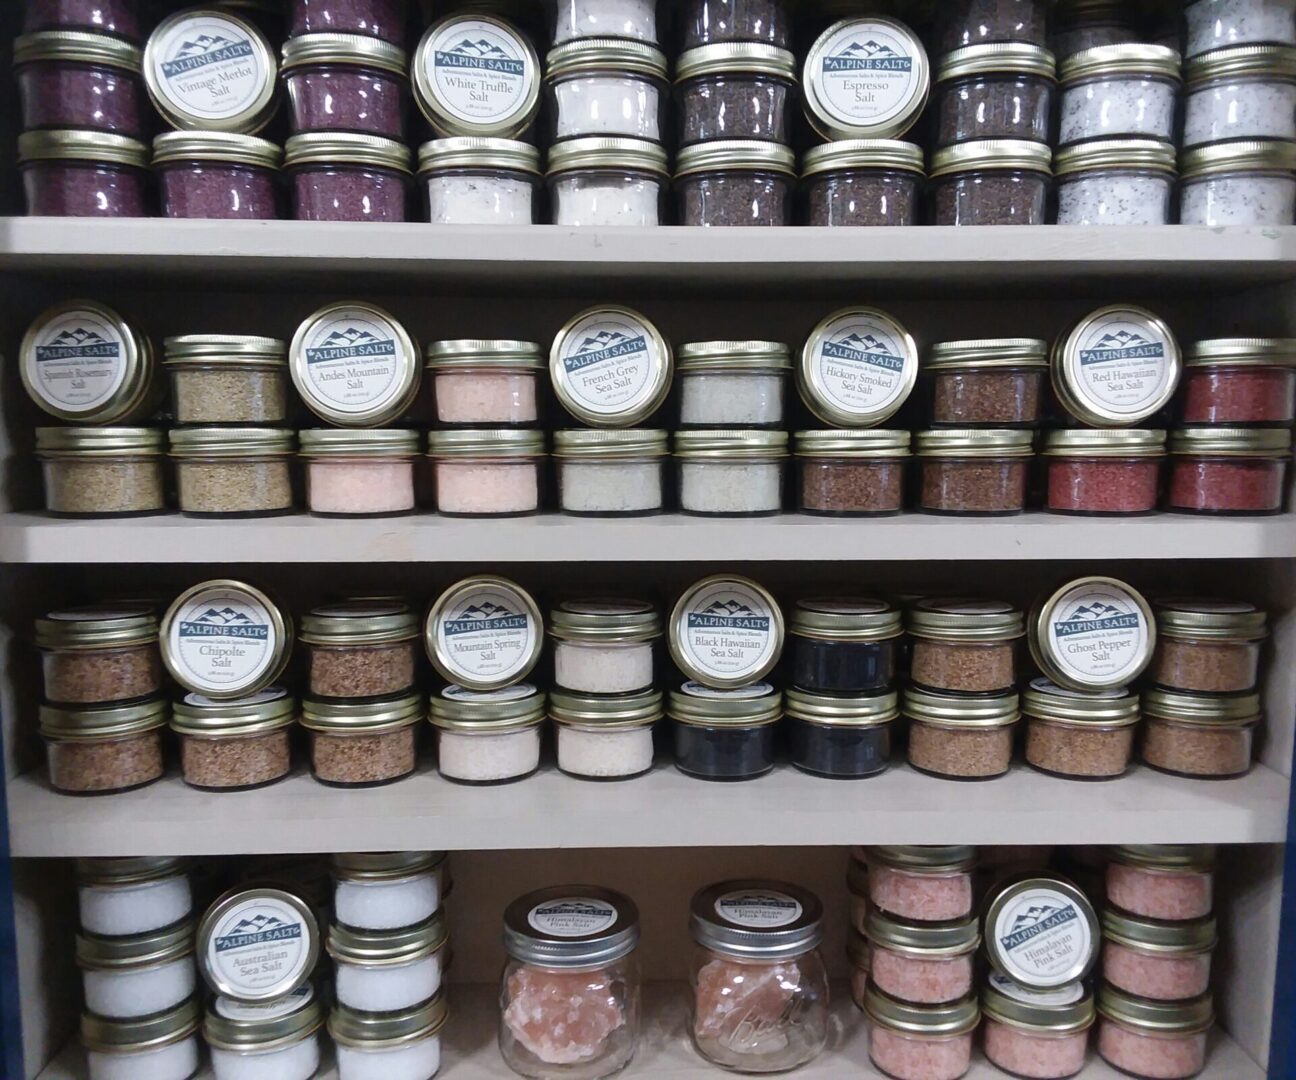 A shelf filled with jars of different colors and sizes.